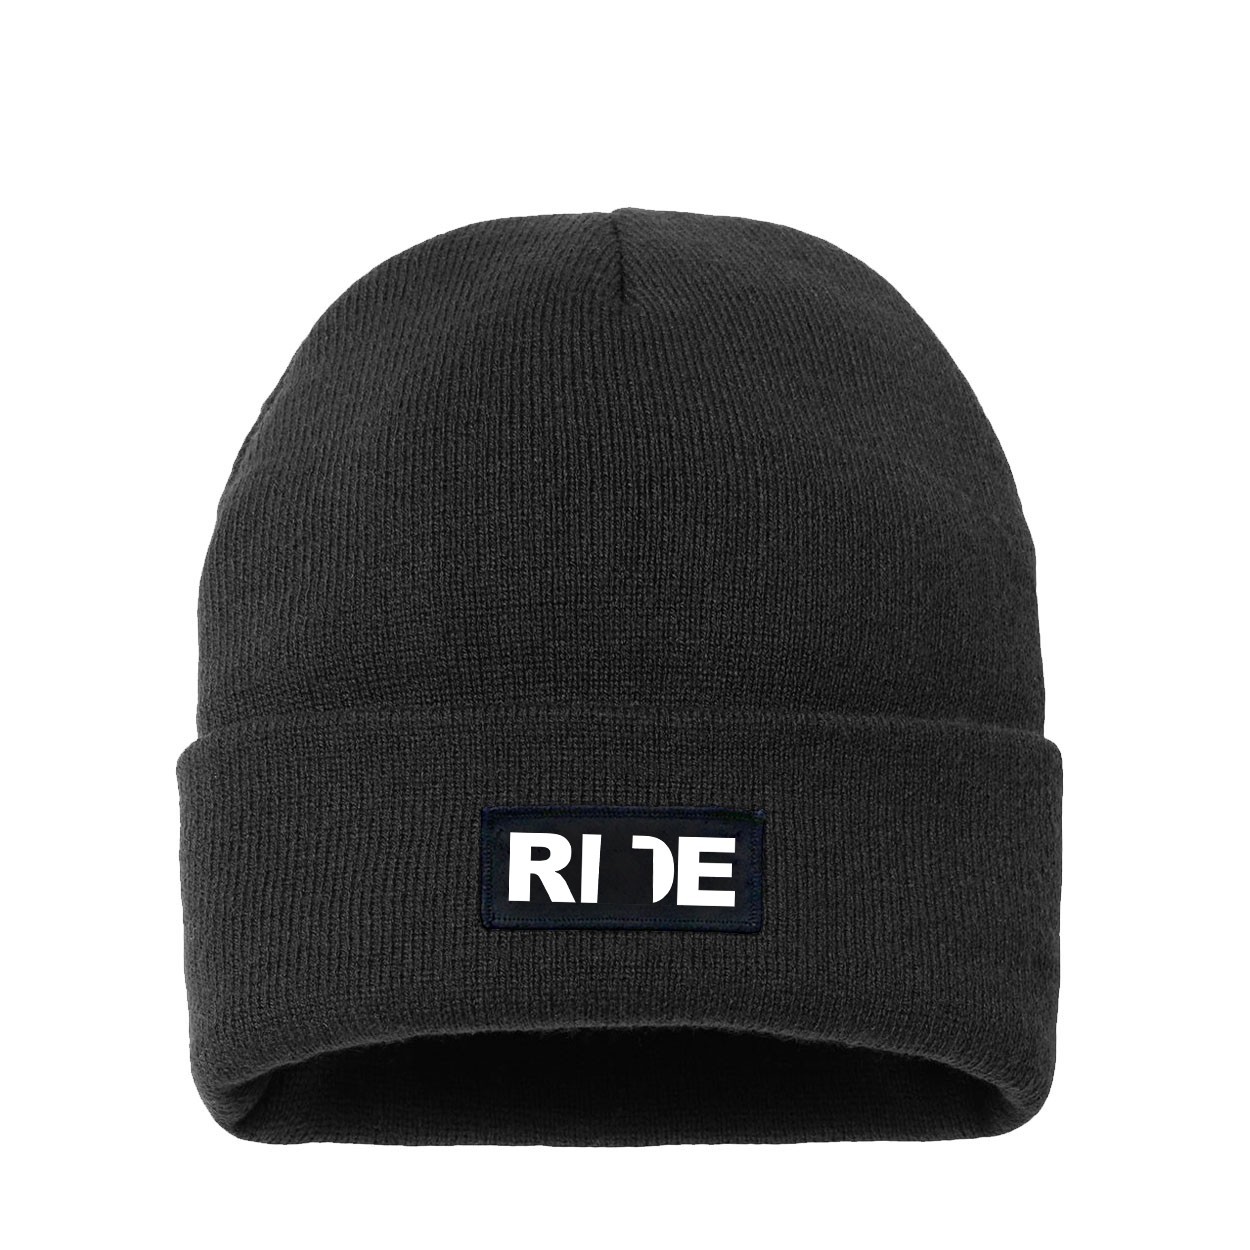 Ride Utah Night Out Woven Patch Night Out Sherpa Lined Cuffed Beanie Black (White Logo)